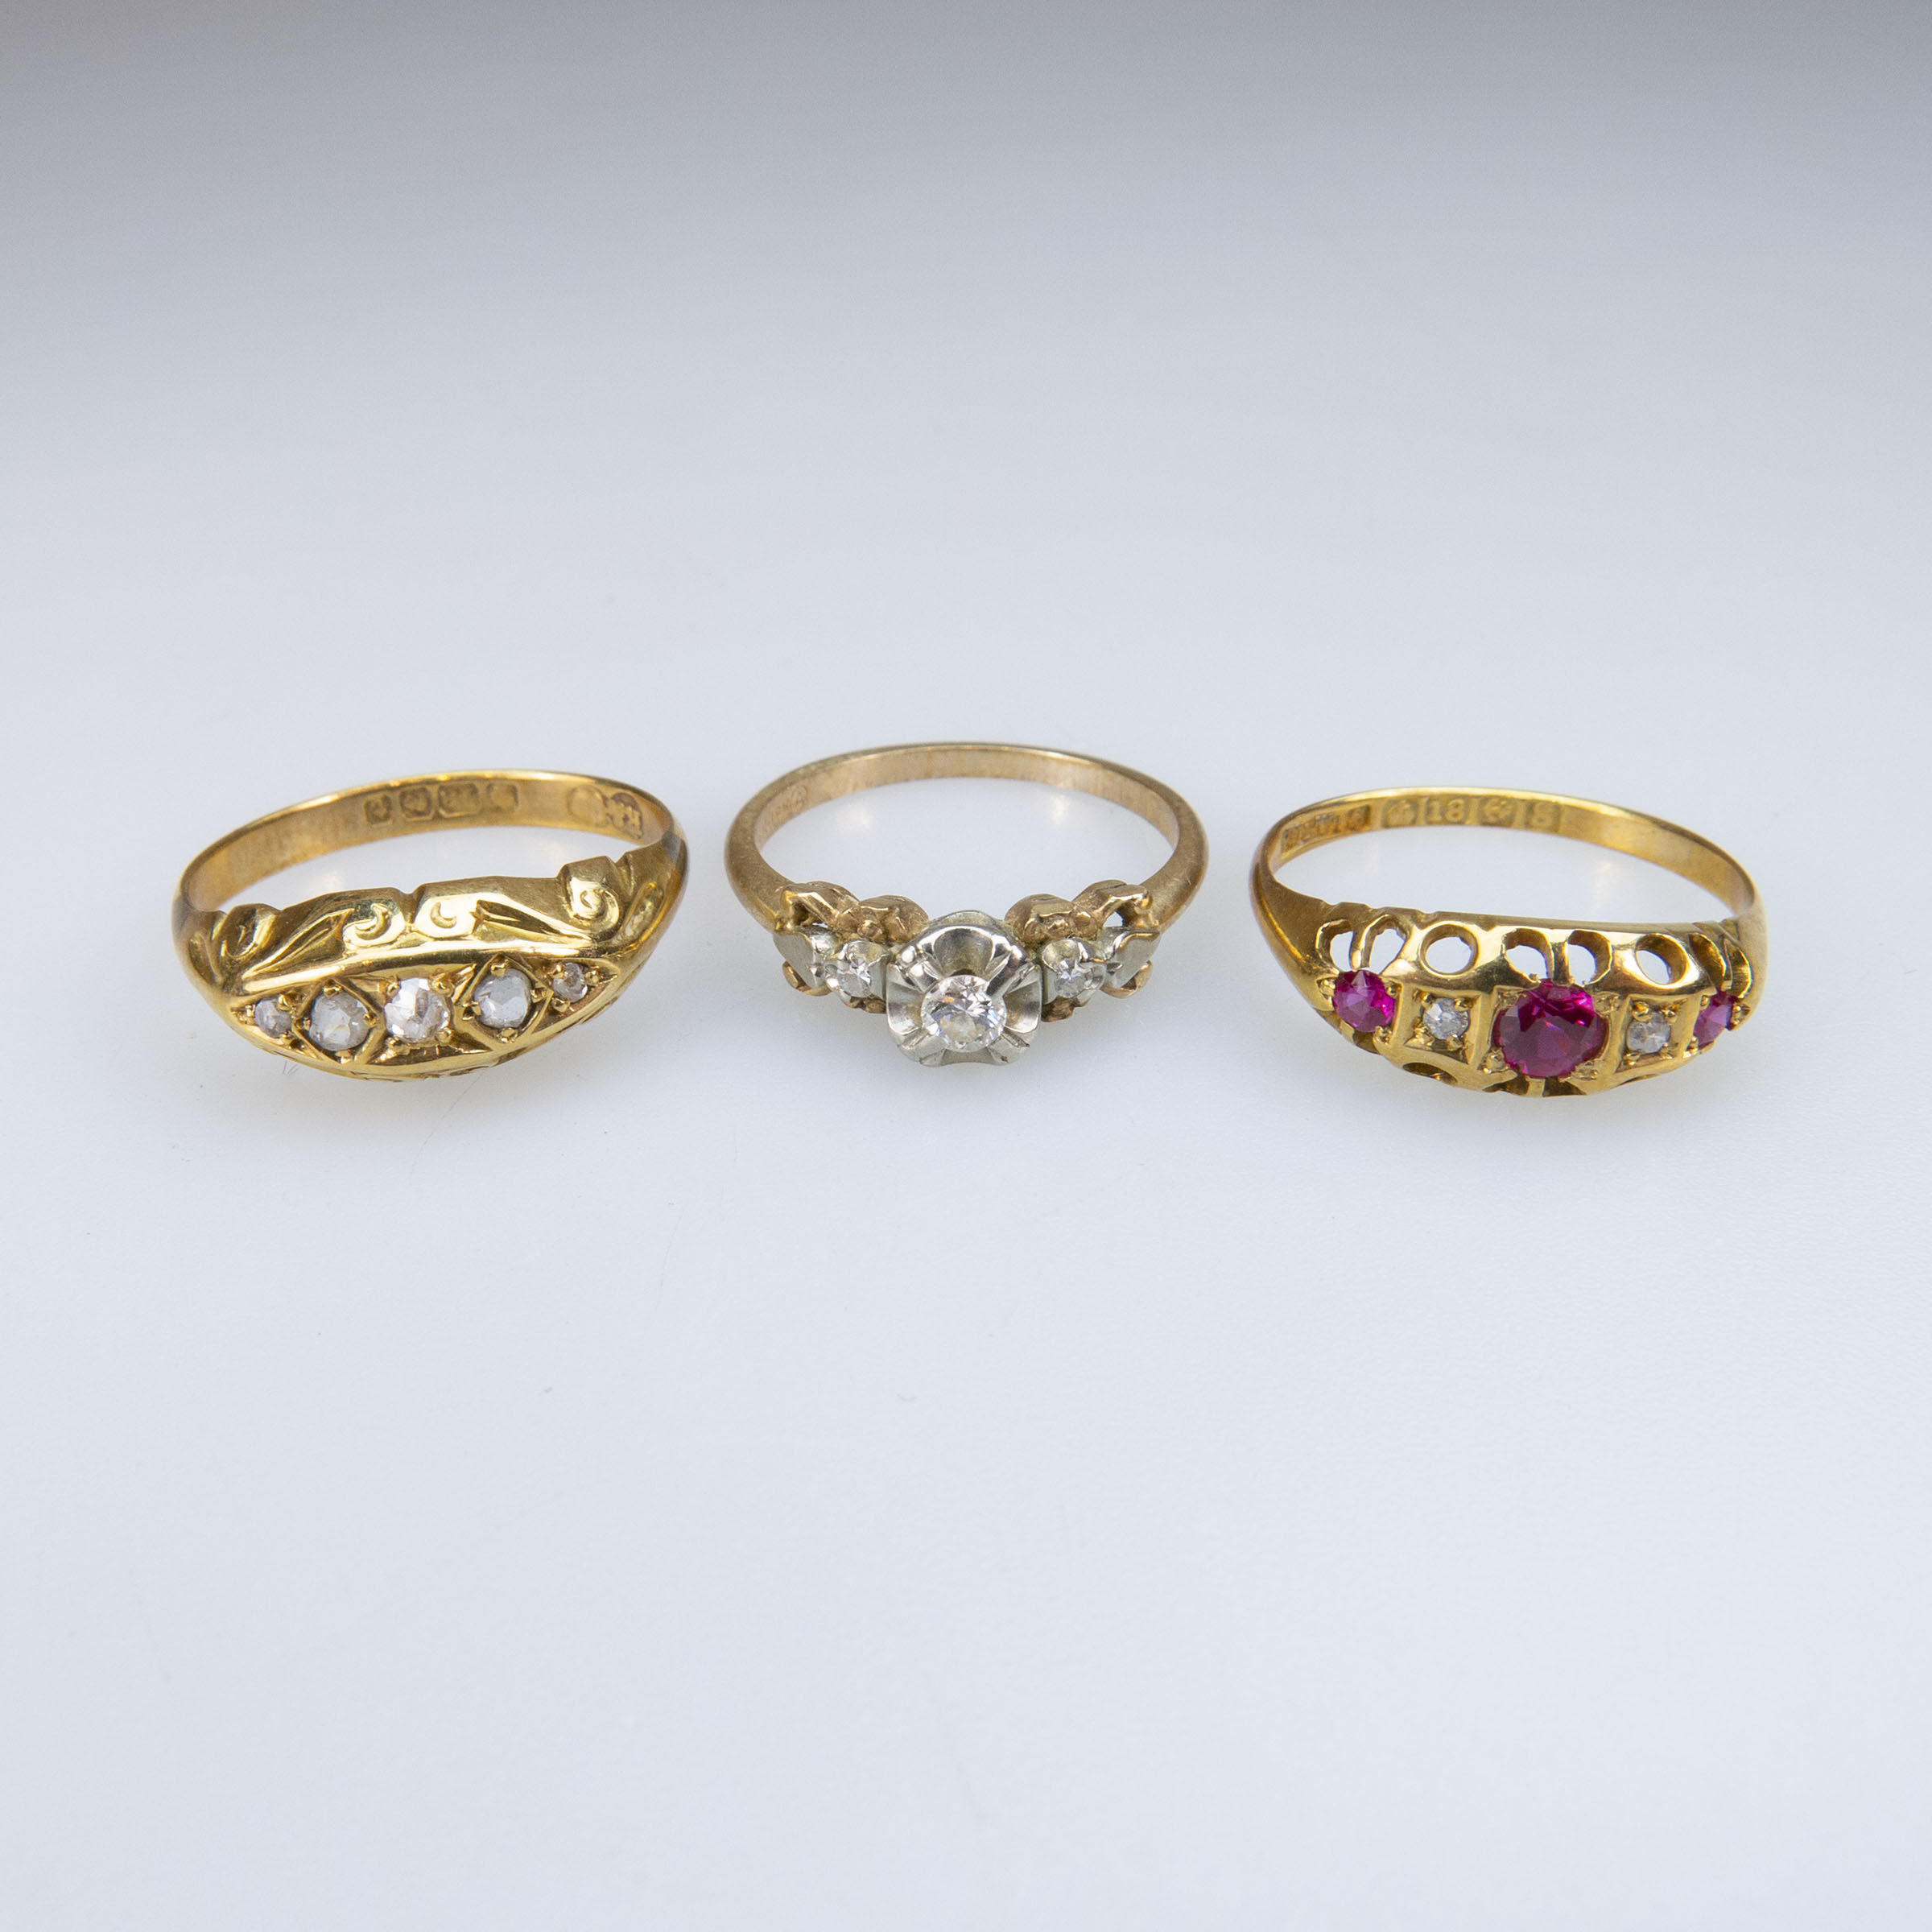 1 x 14k And 2 x English 18k Yellow Gold Rings